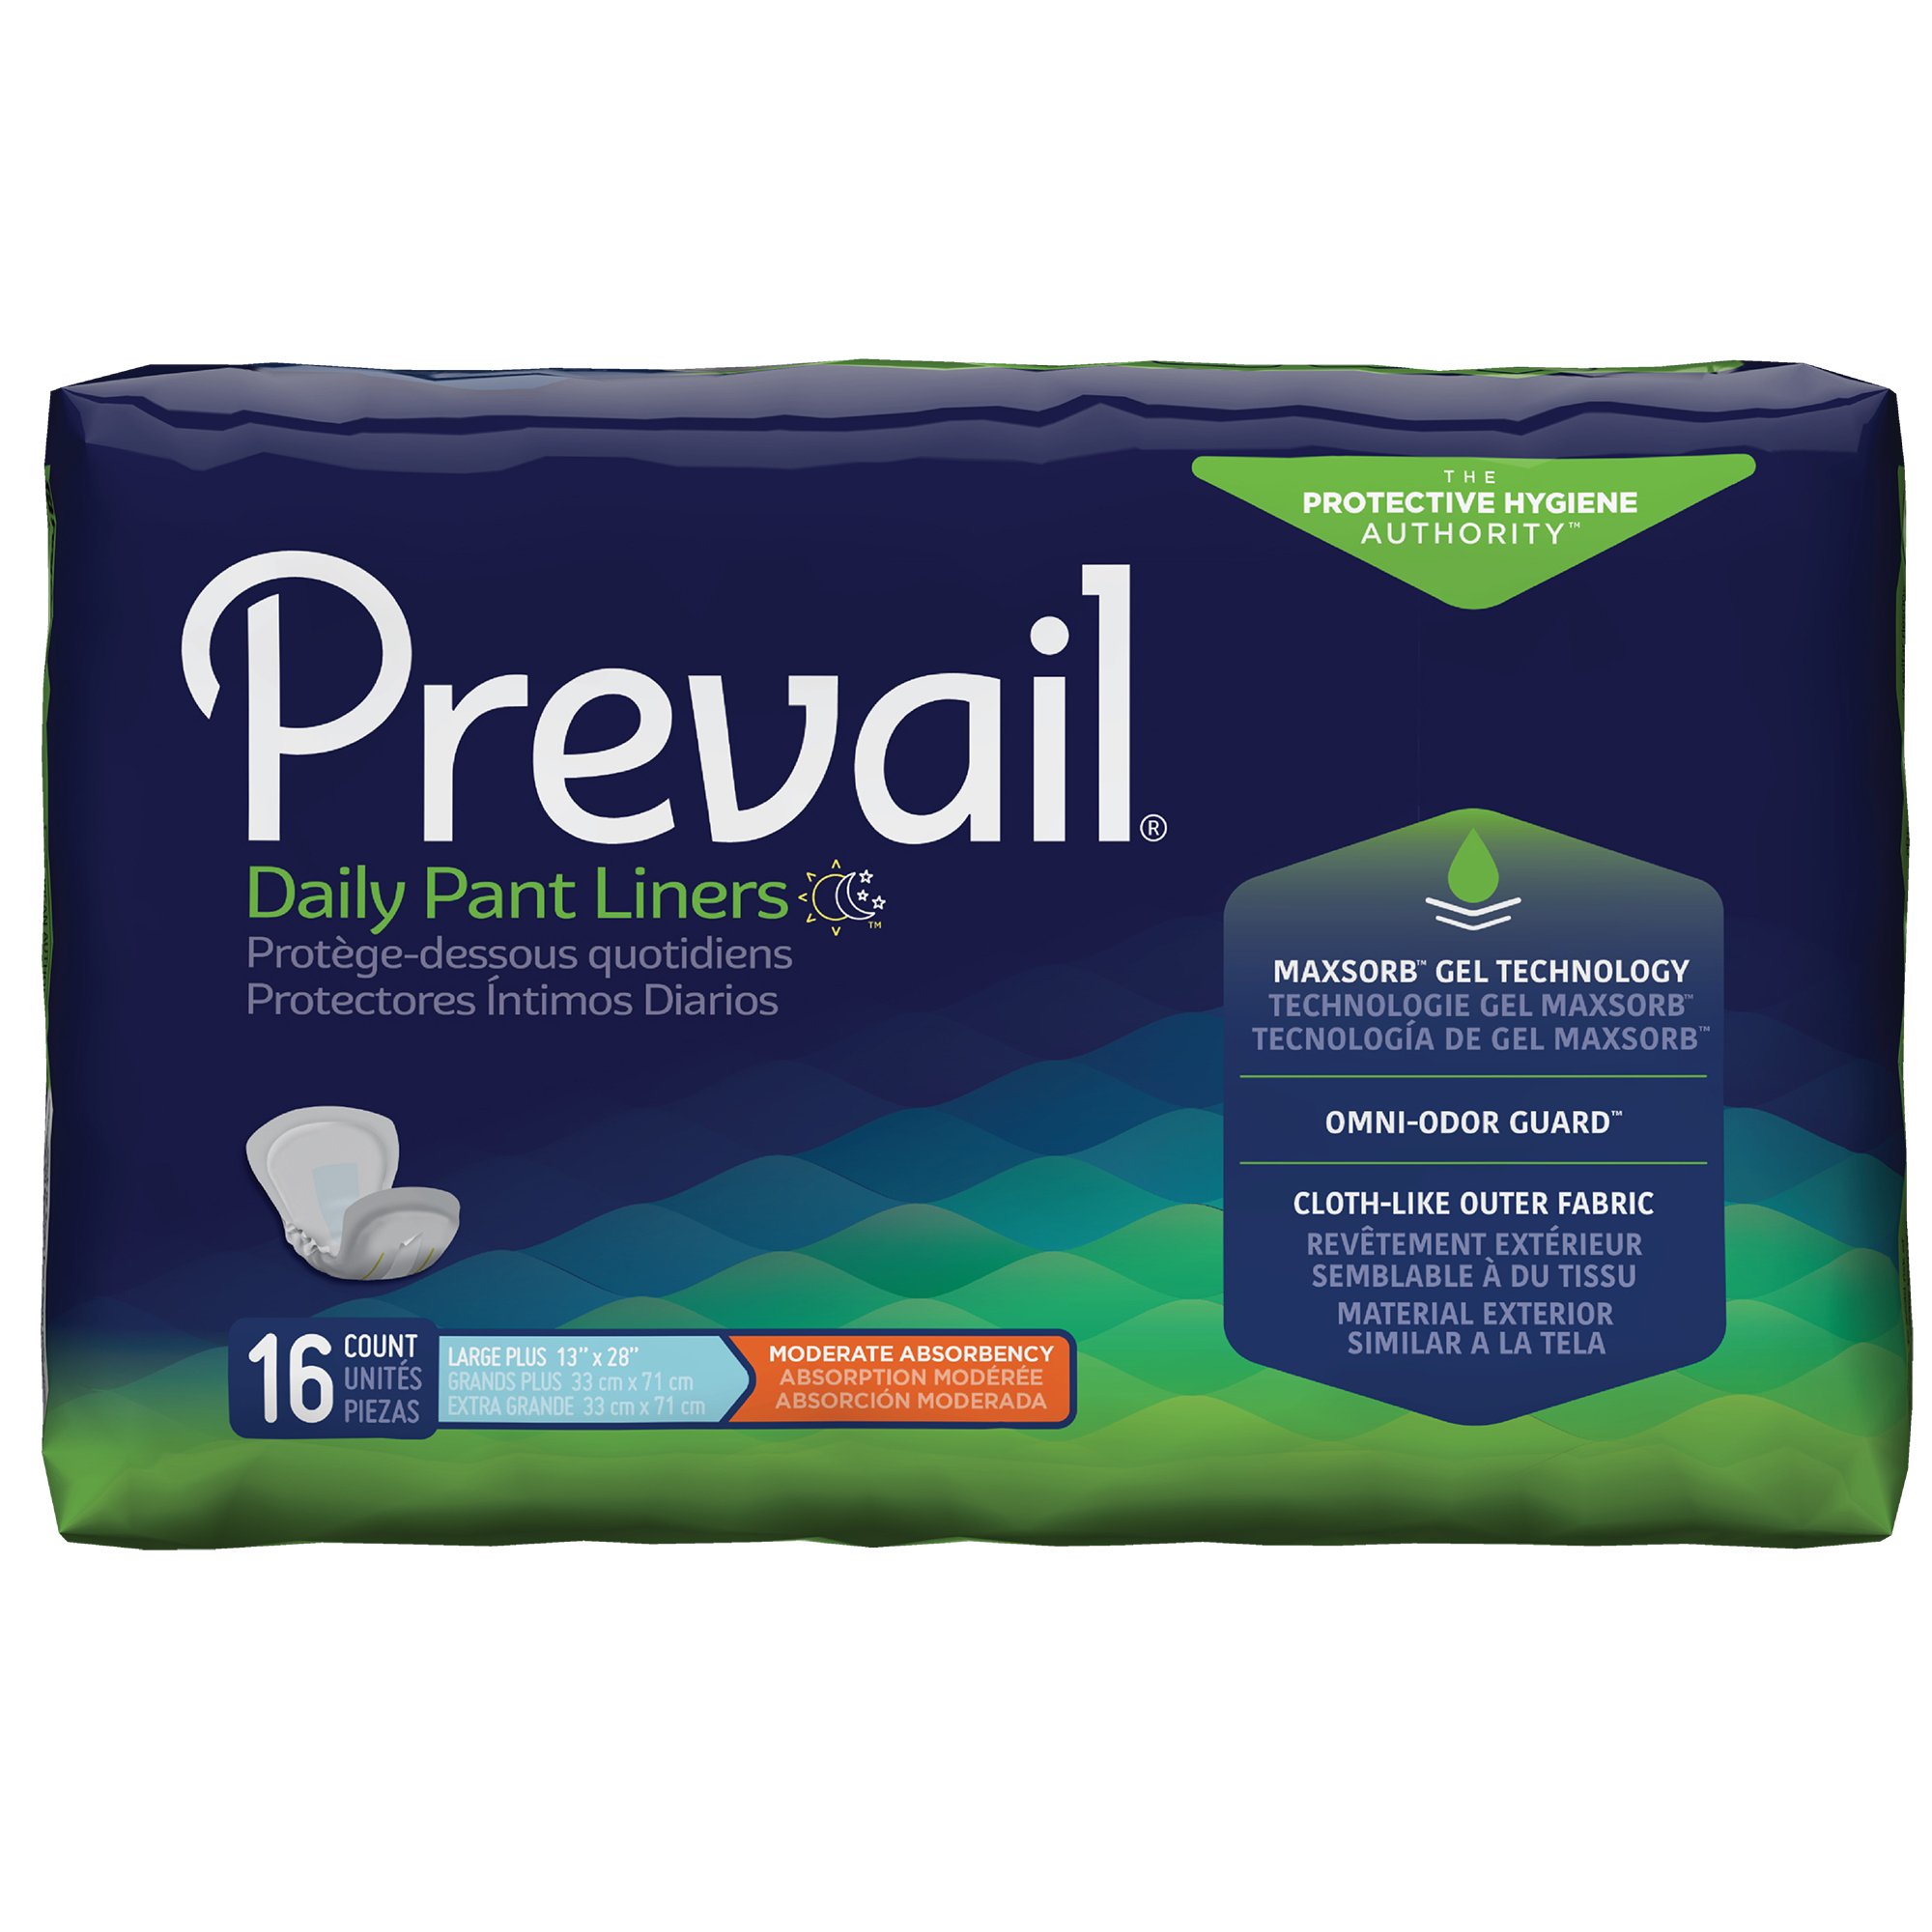 Prevail Daily Pant Liners Moderate Absorbency Bladder Control Pad, 28-Inch Length